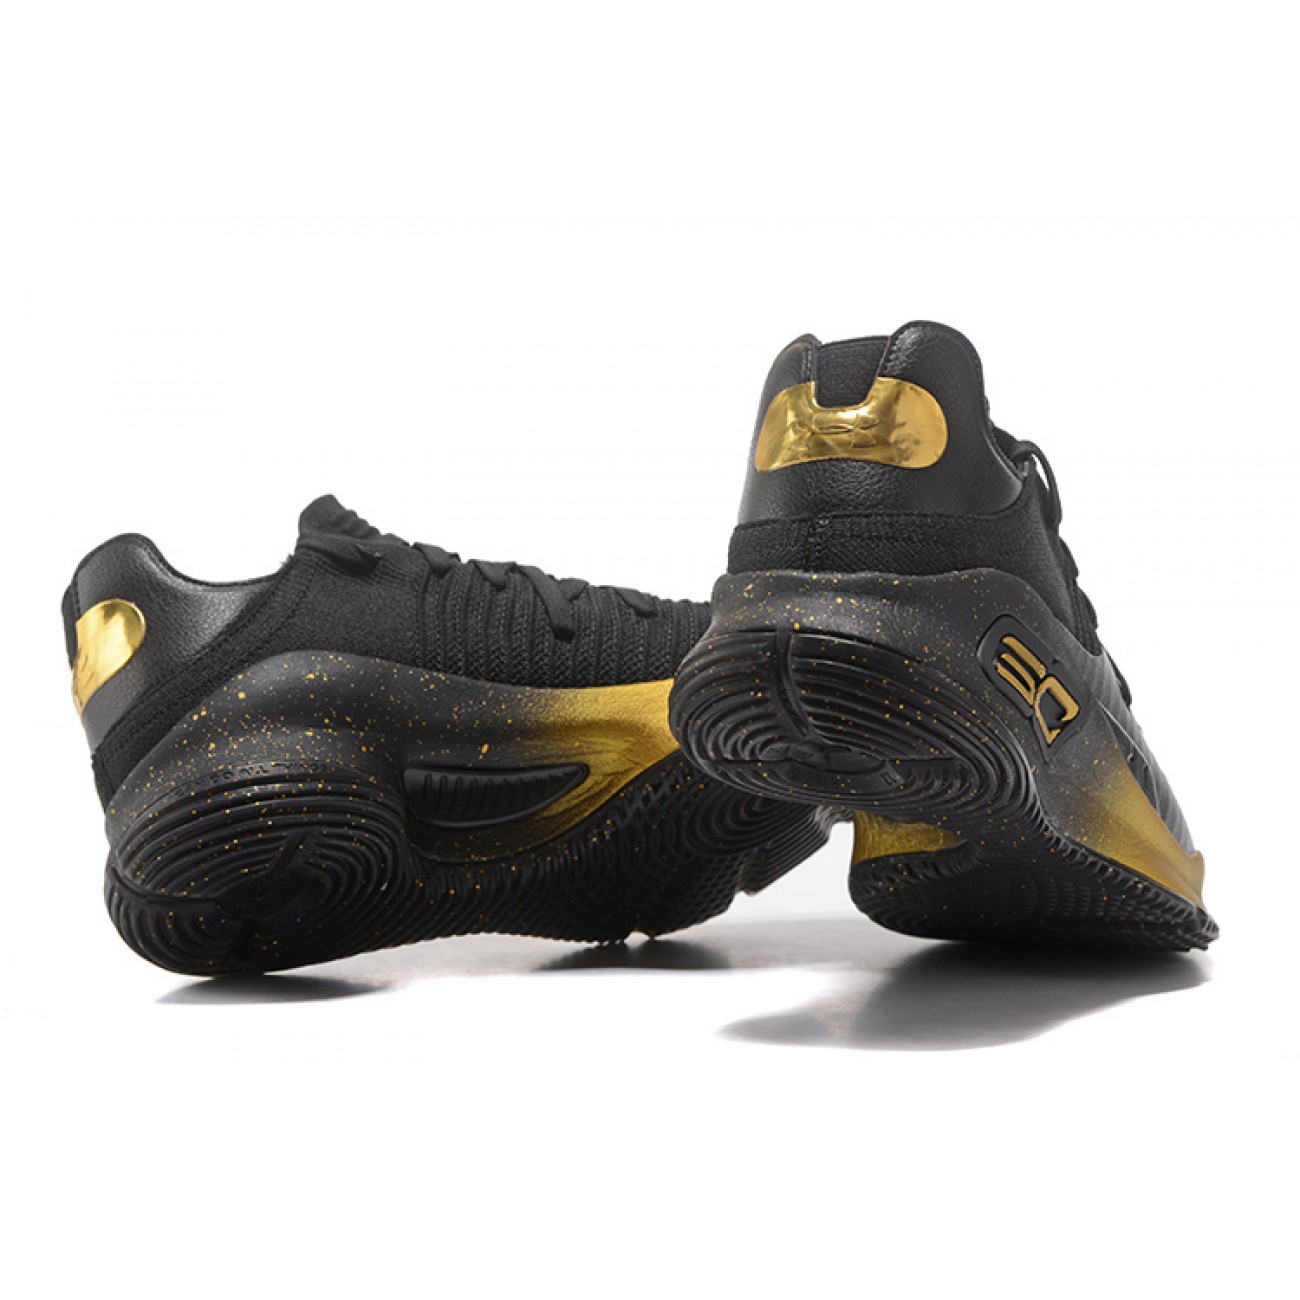 Under Armour UA Curry 4 Low Black/Gold